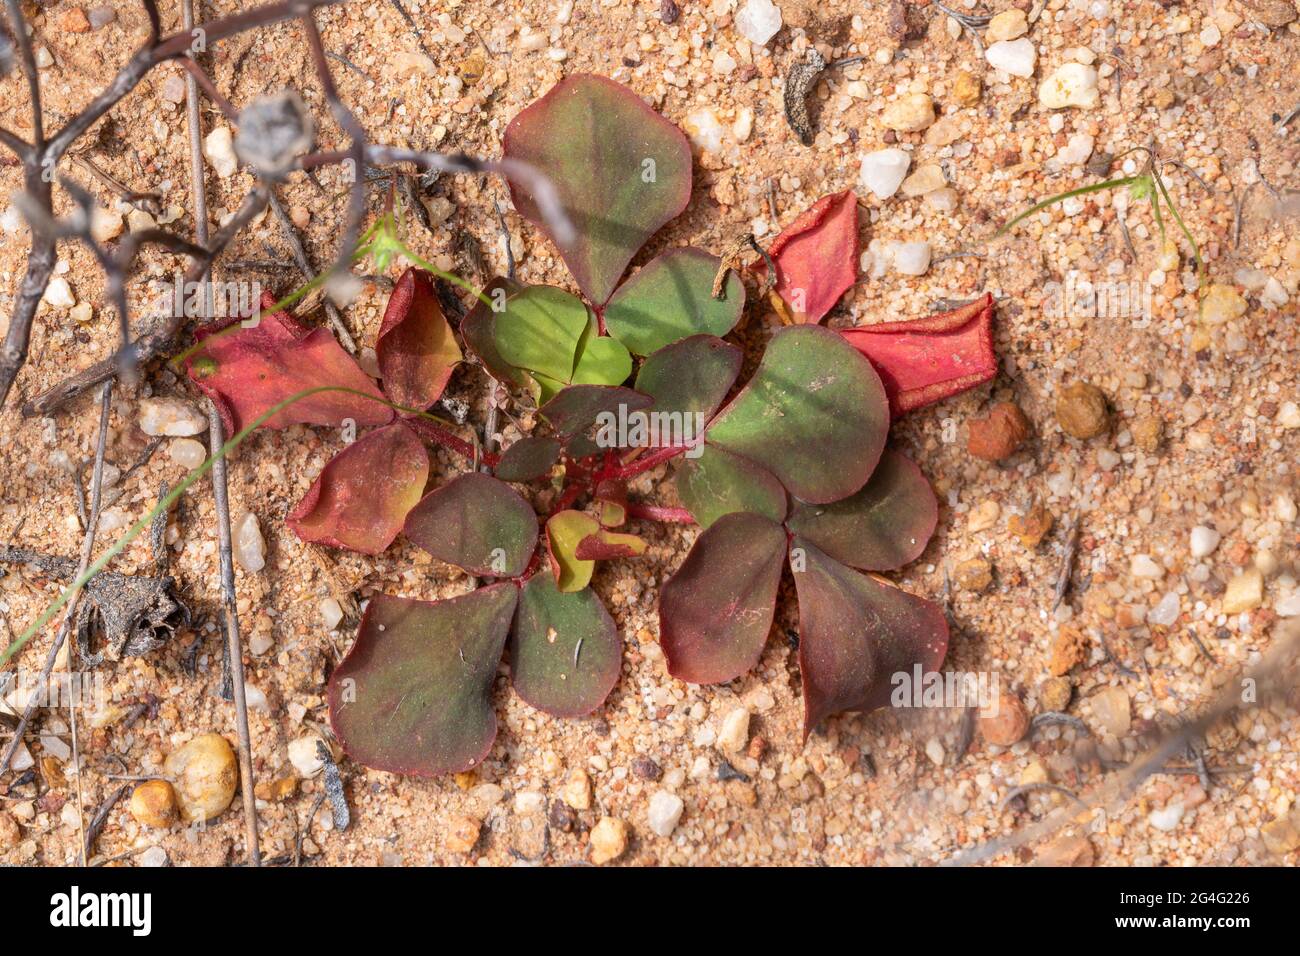 Close-up of a group of leaves from an Oxalis species seen in natural habitat close to VanRhynsdorp in the Western Cape of South Africa Stock Photo